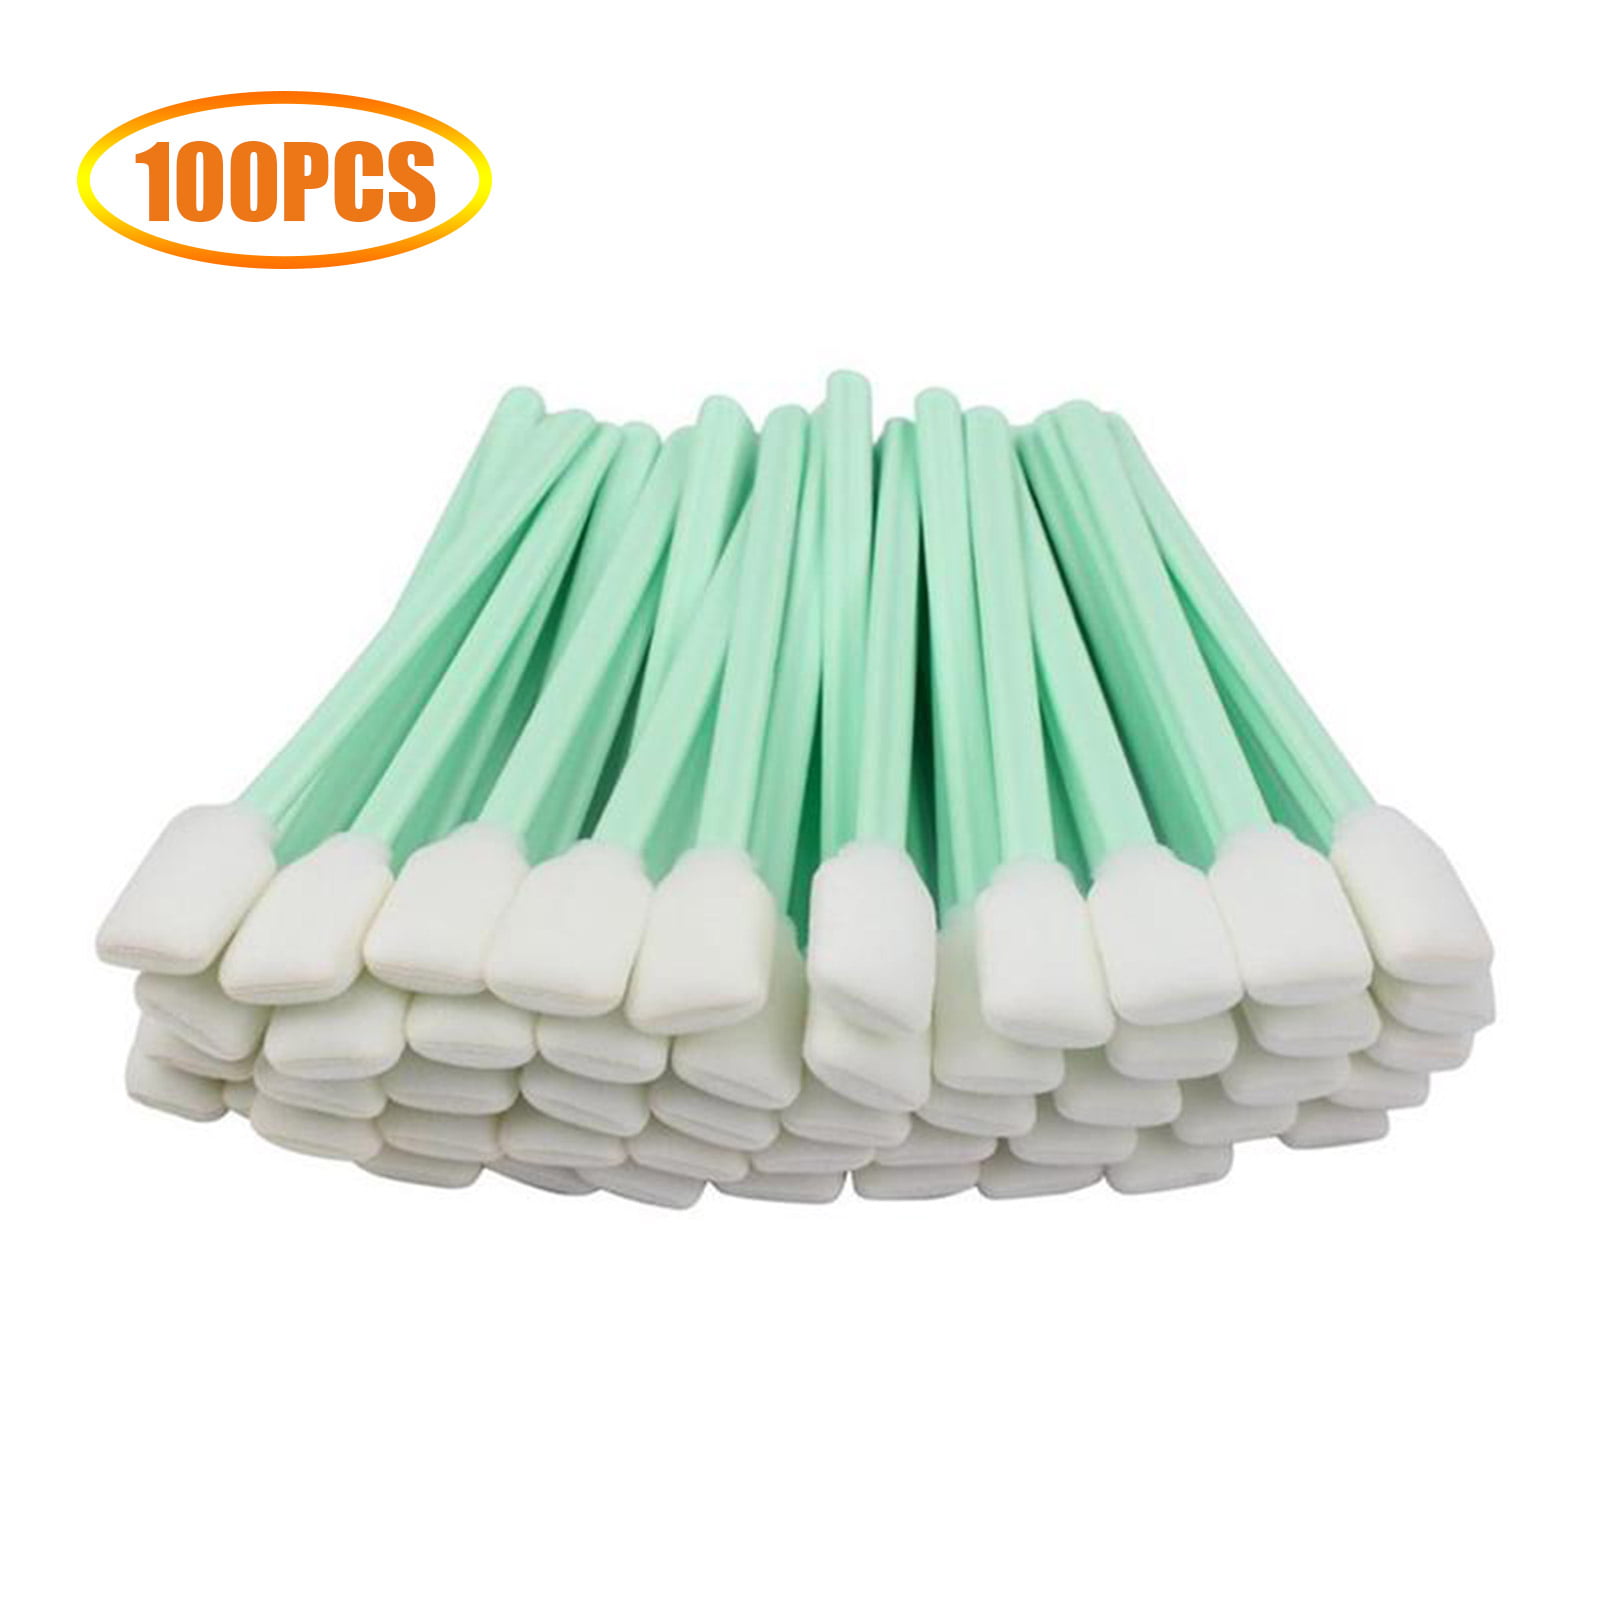 Cleaning Foam Swabs Sticks Fit For Roland Mimaki Mutoh Epson Printer 100Pcs 